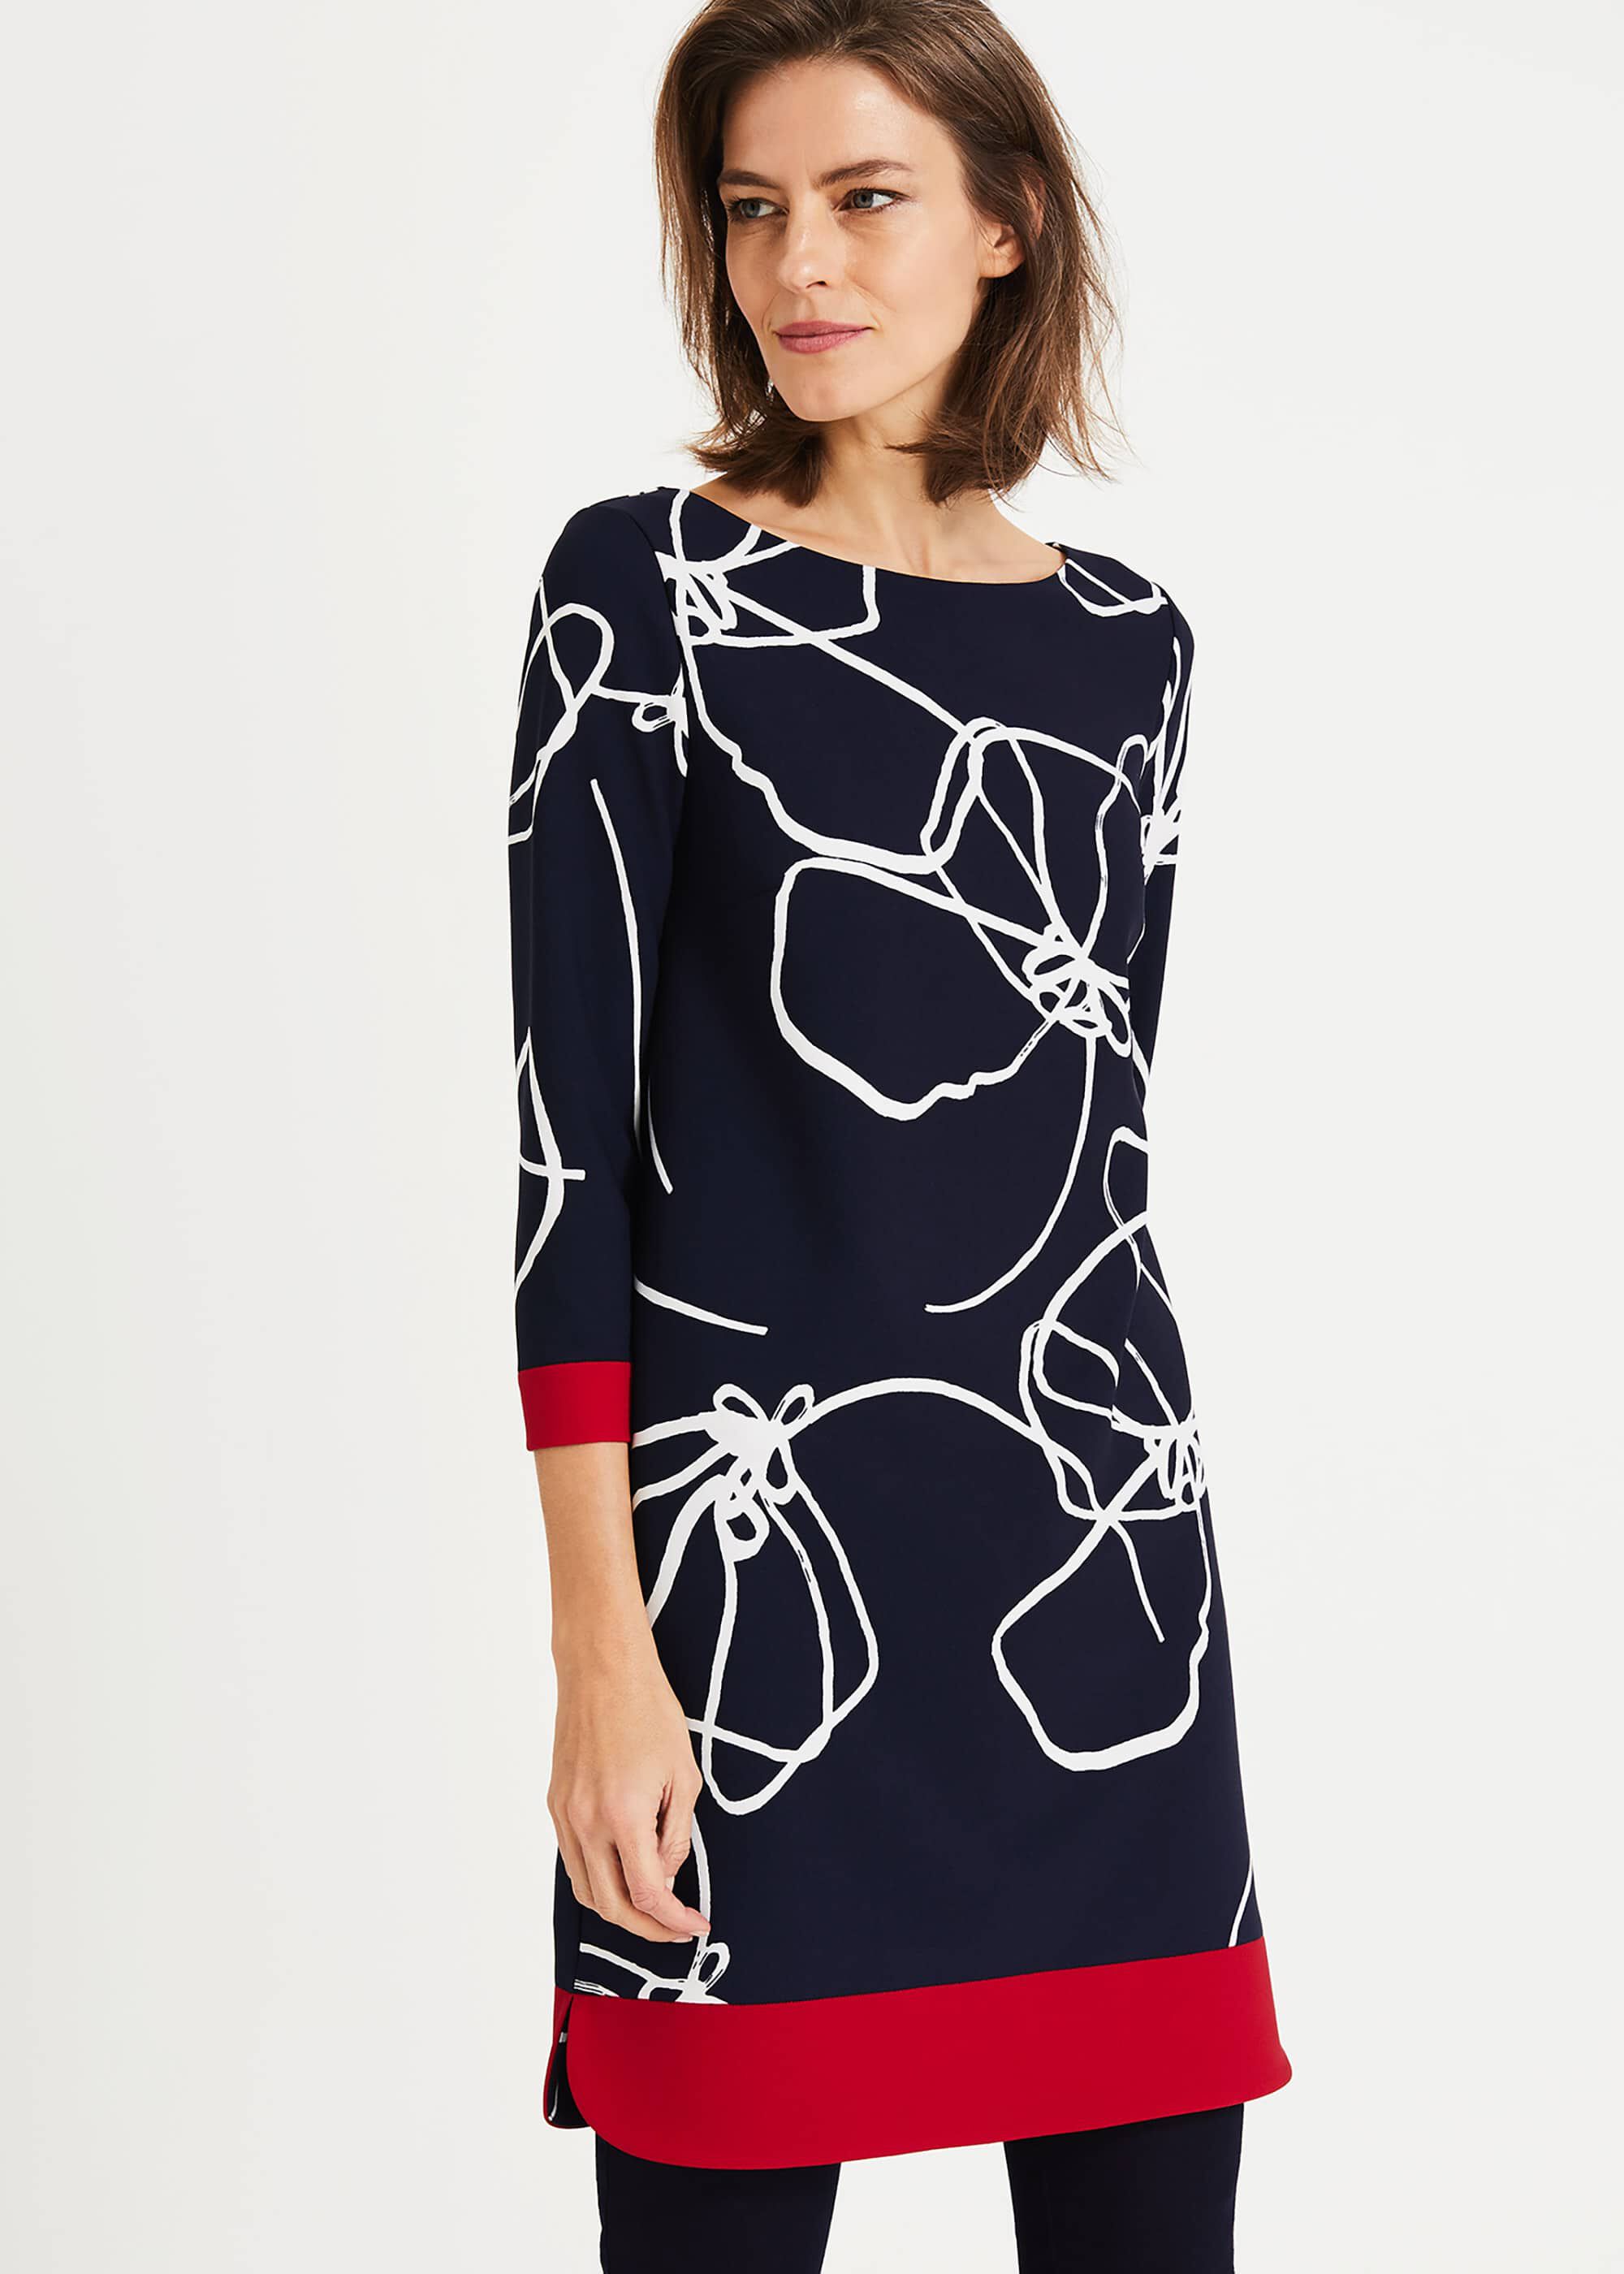 Libby Linear Floral Dress | Phase Eight